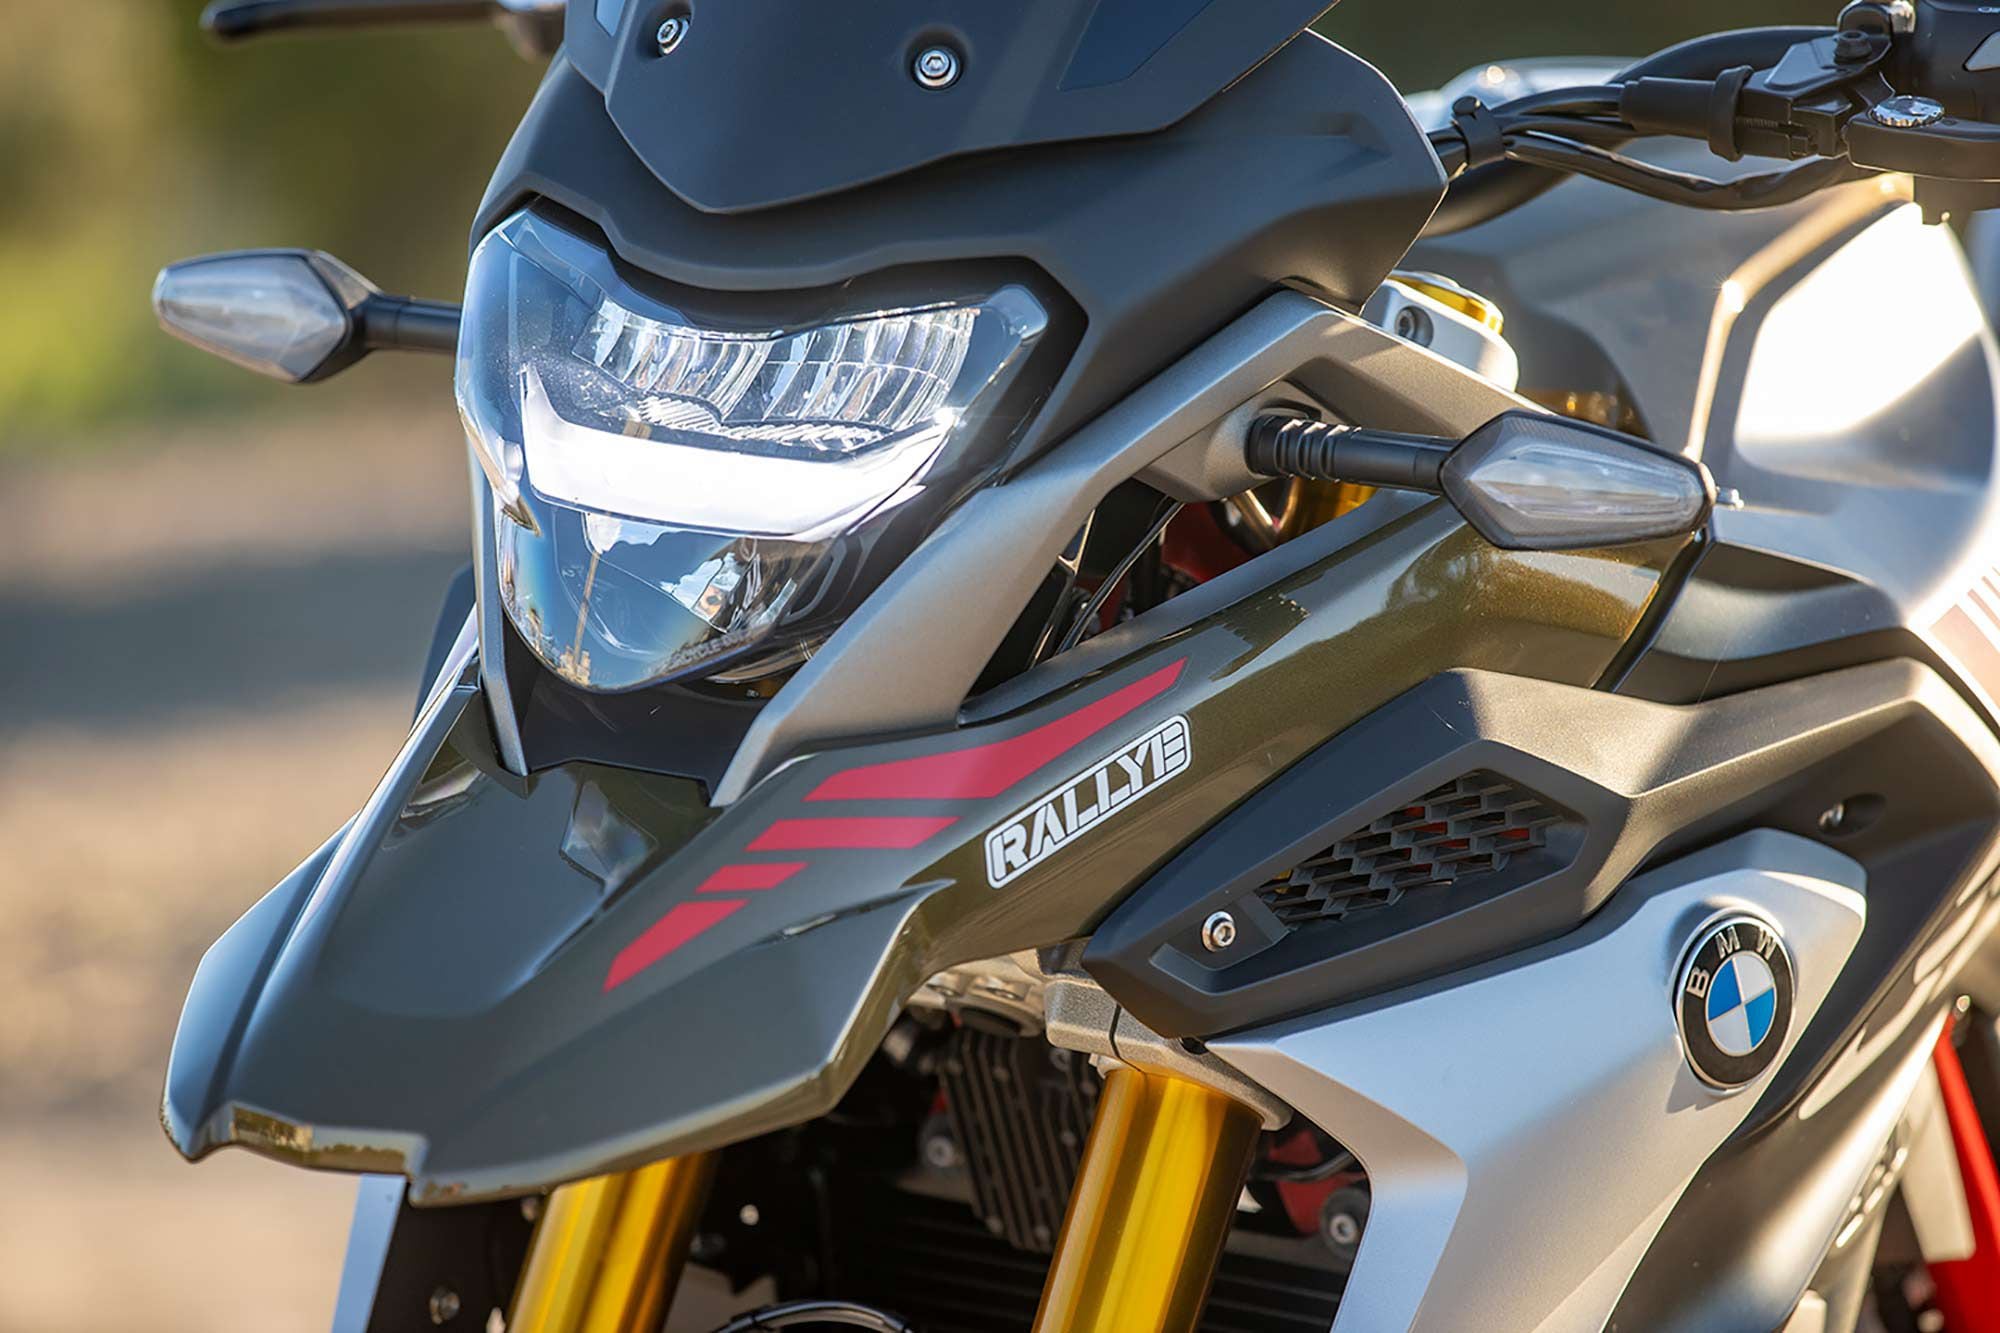 BMW equipped the G 310 GS with a LED headlight, taillight, and turn indicators.